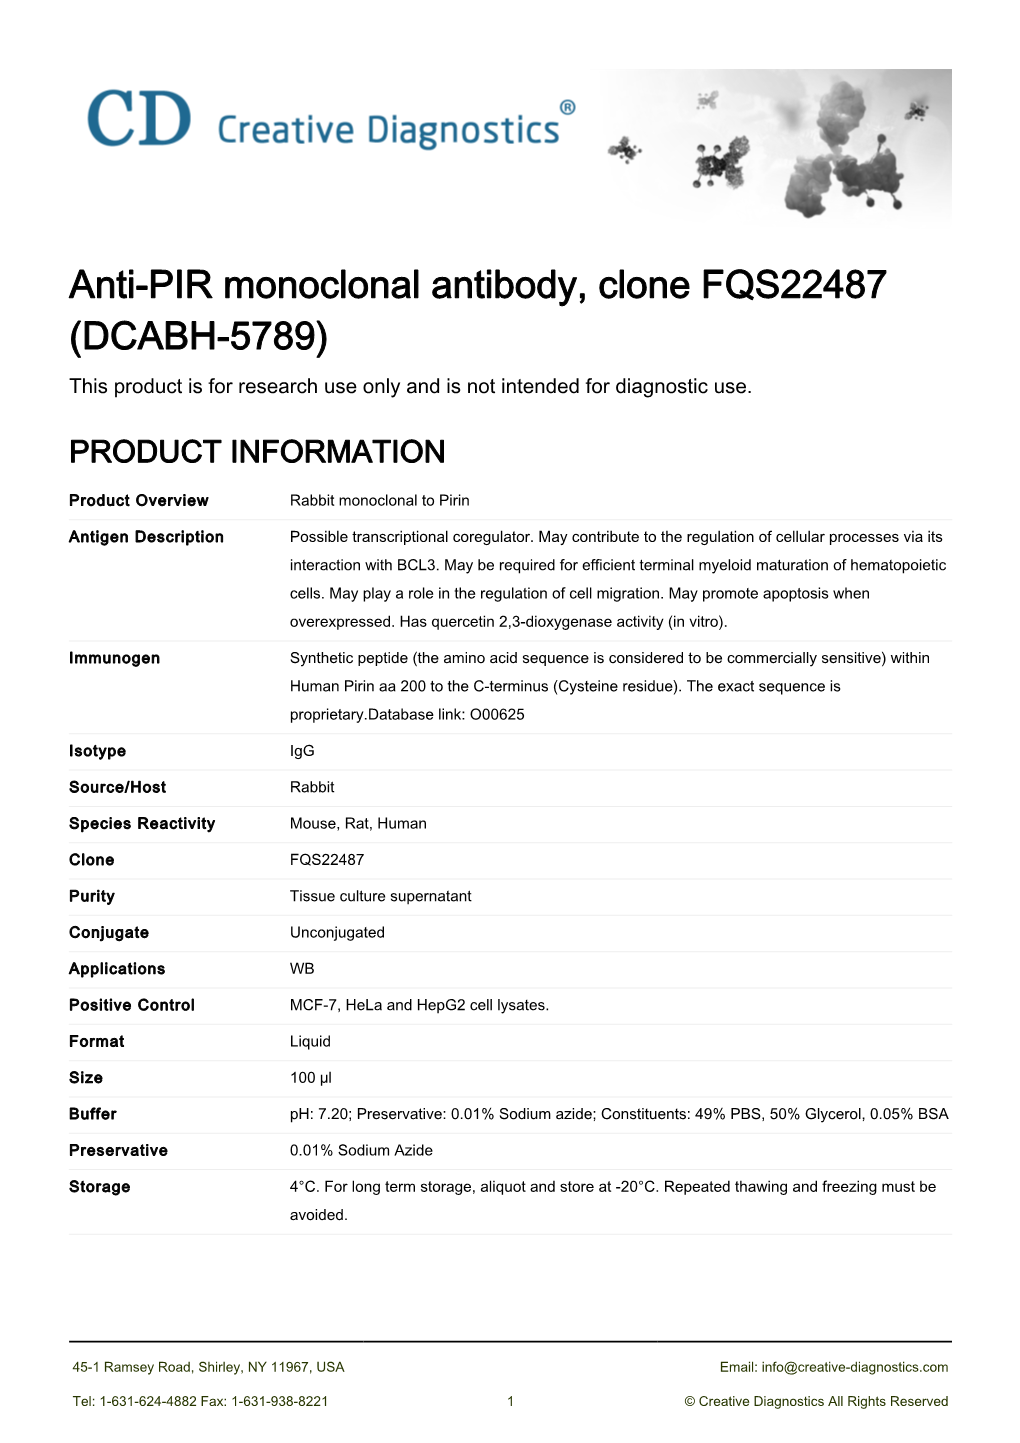 Anti-PIR Monoclonal Antibody, Clone FQS22487 (DCABH-5789) This Product Is for Research Use Only and Is Not Intended for Diagnostic Use